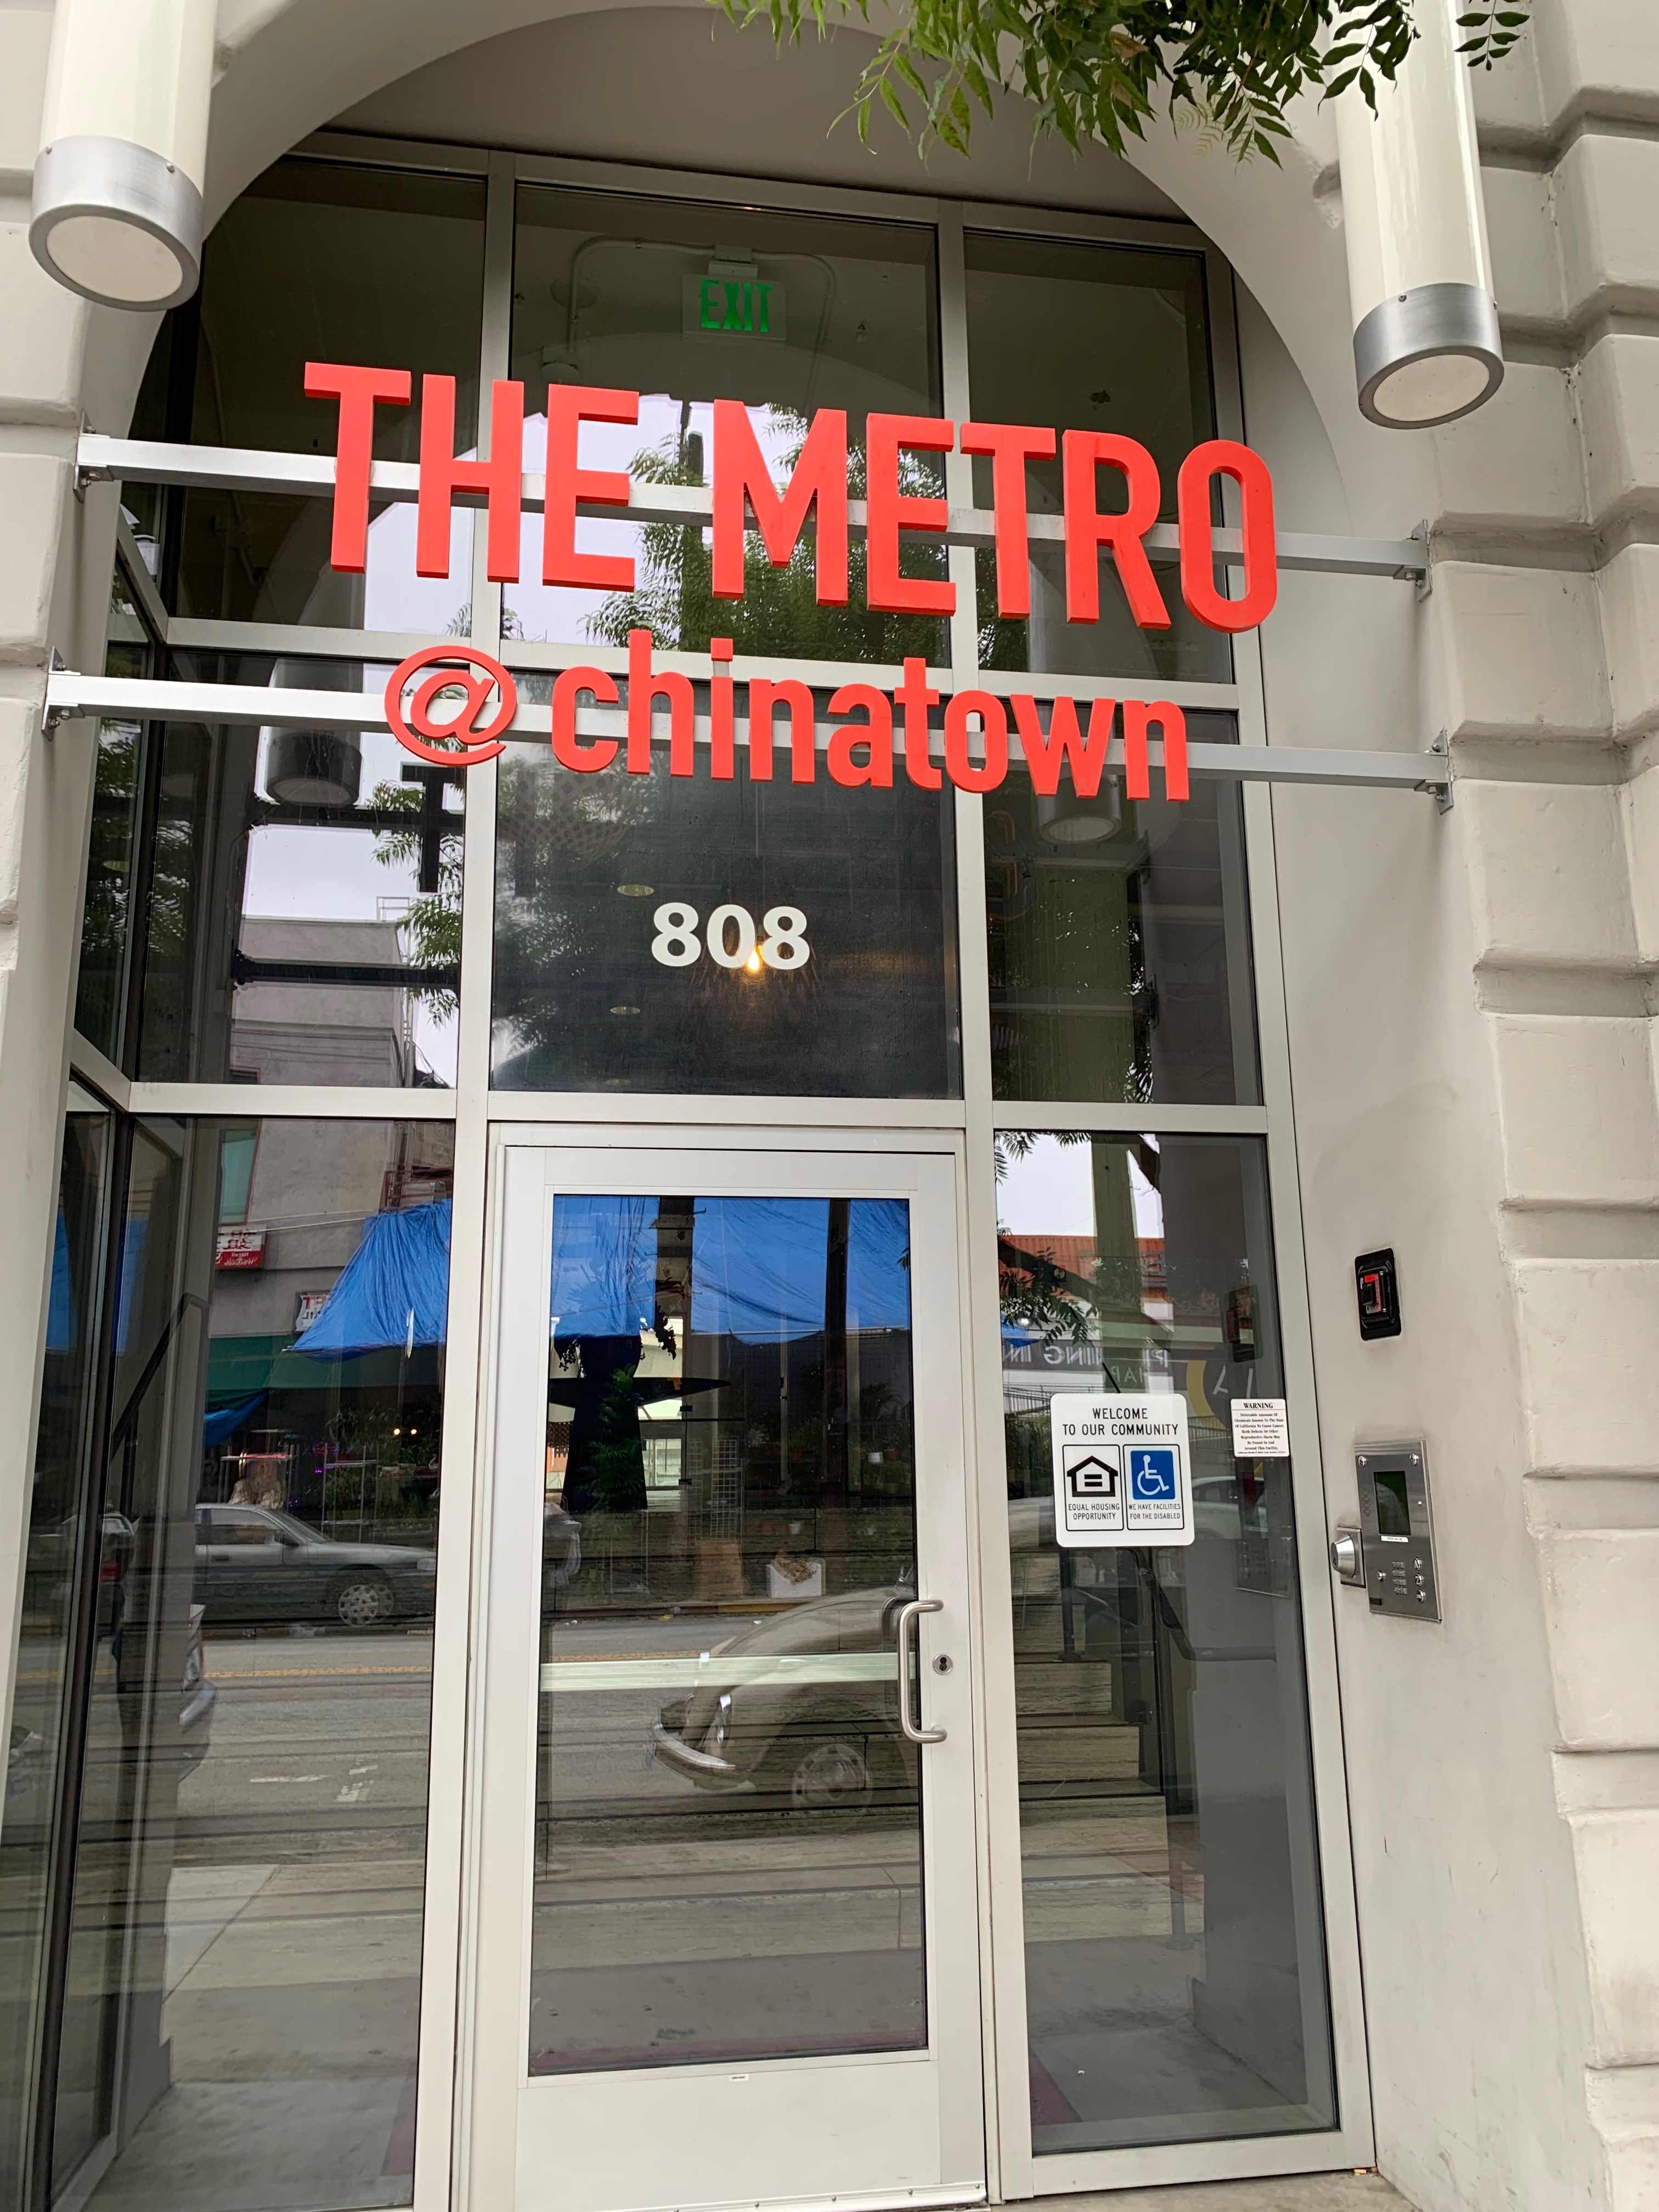 Front view of building entrance. Entrance consists of large windows and a glass door. There is a key pad on the side, and red letters read "The Metro @ chinatown" as a header above the door.